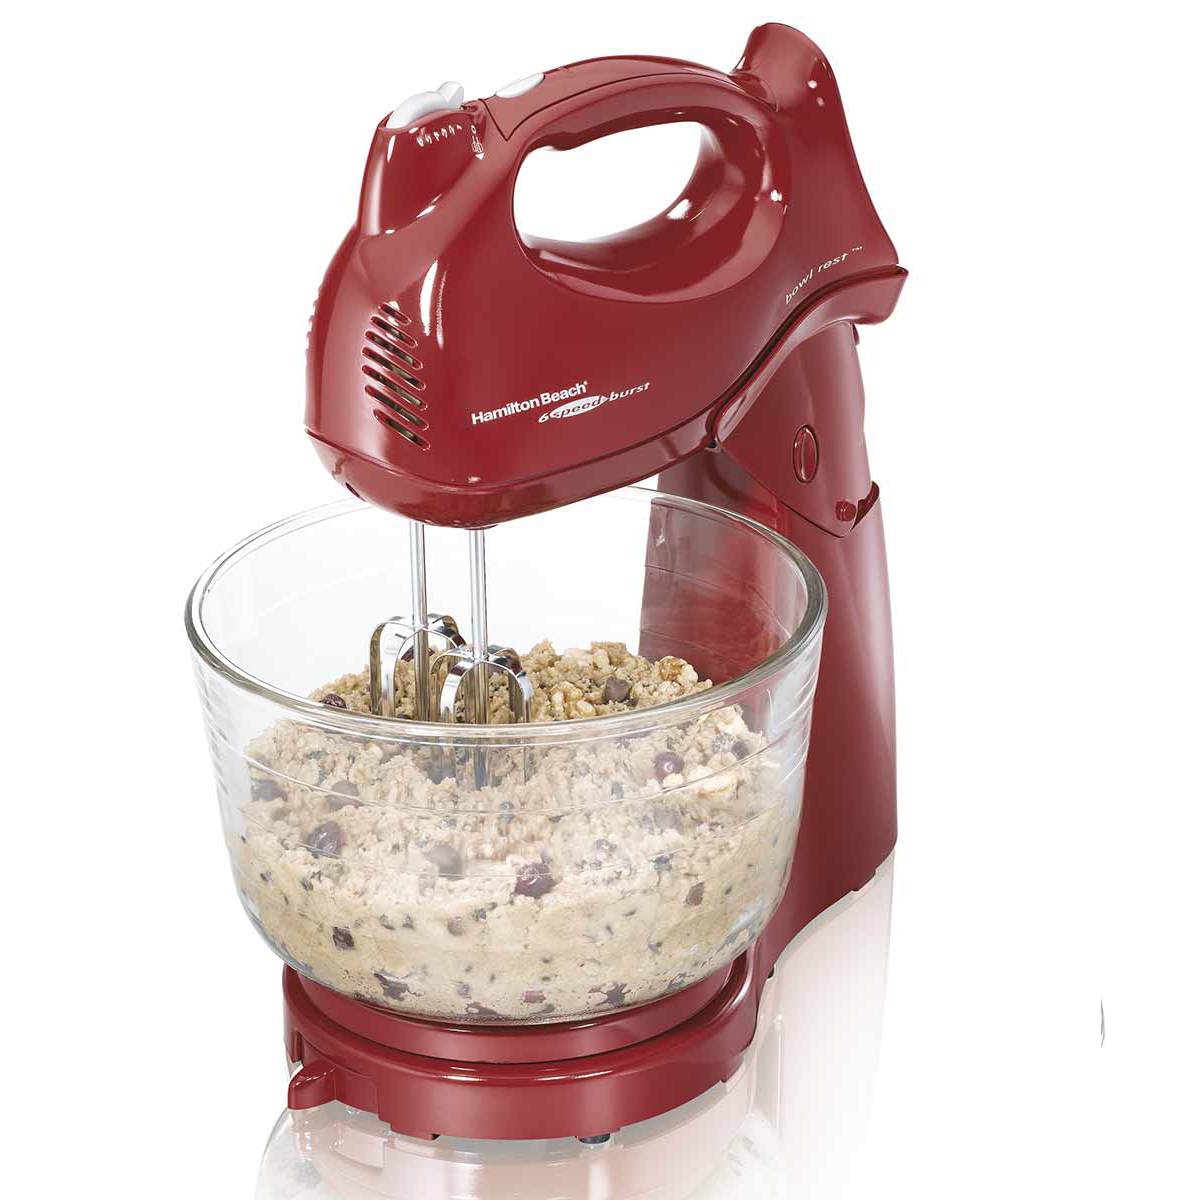 Power Deluxe™ 6 Speed Hand/Stand Mixer, Red (64699)